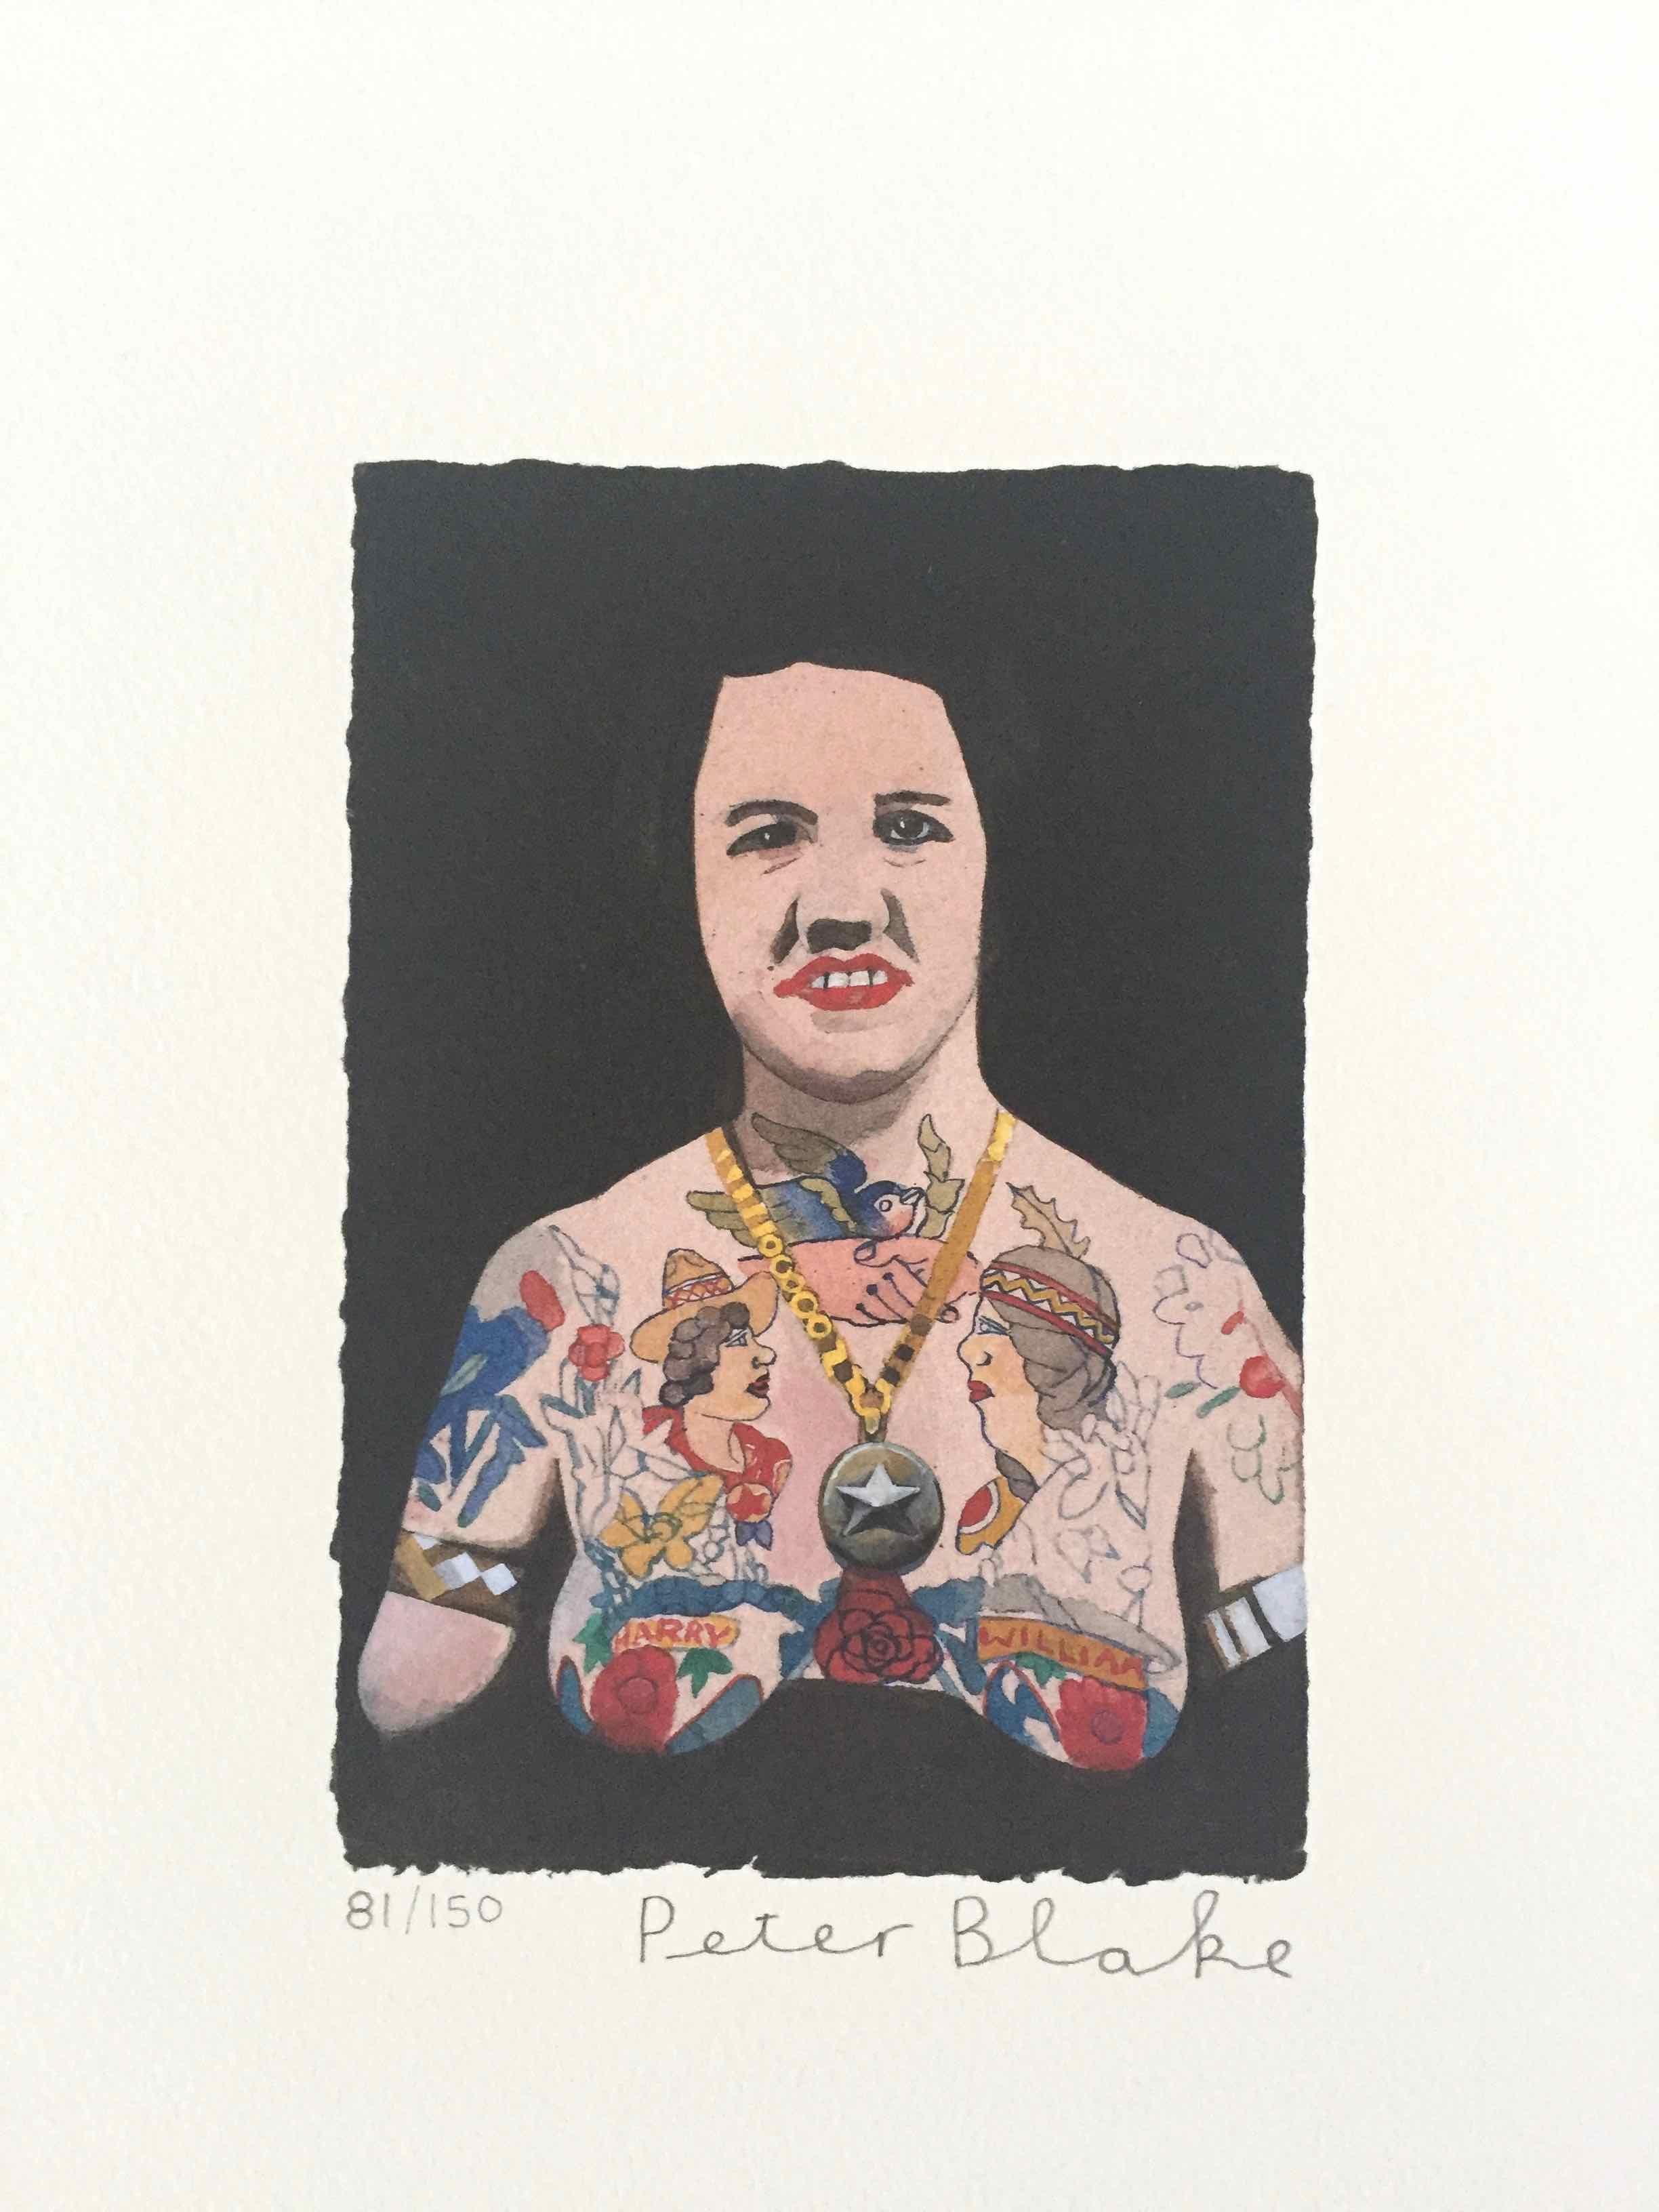 Tattooed People, Doris, 2015, Archival limited edition inkjet print on photo rag satin paper, Edition 81/150, 11 × 8 3/10 in, 28 × 21 cm, signed and numbered by Sir Peter Blake (unframed)

Widely regarded as the godfather of British Pop art and the